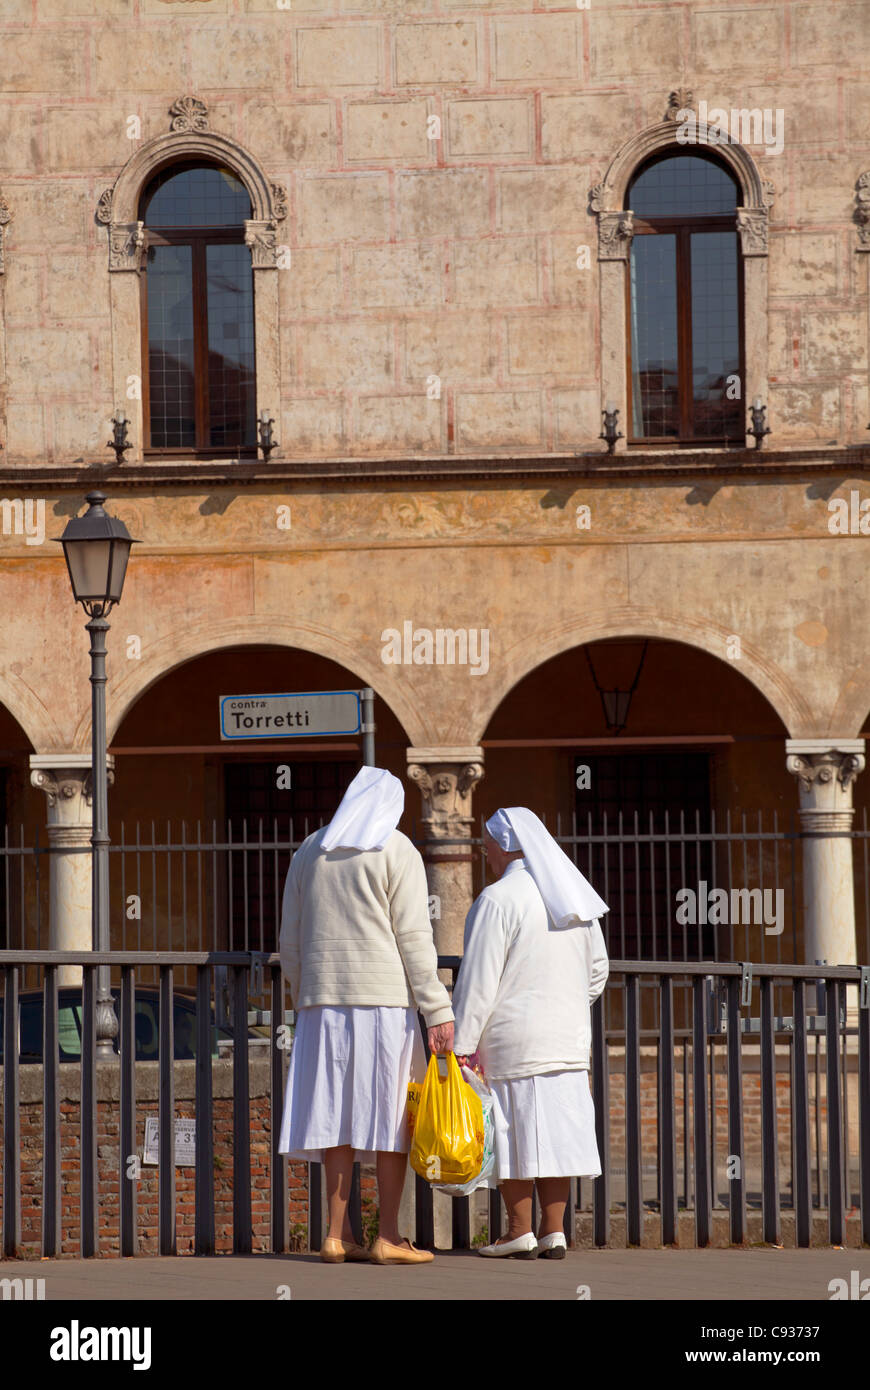 Italy, Veneto, Vicenza, Two nuns from a Catholic religious order stand on a bridge Stock Photo